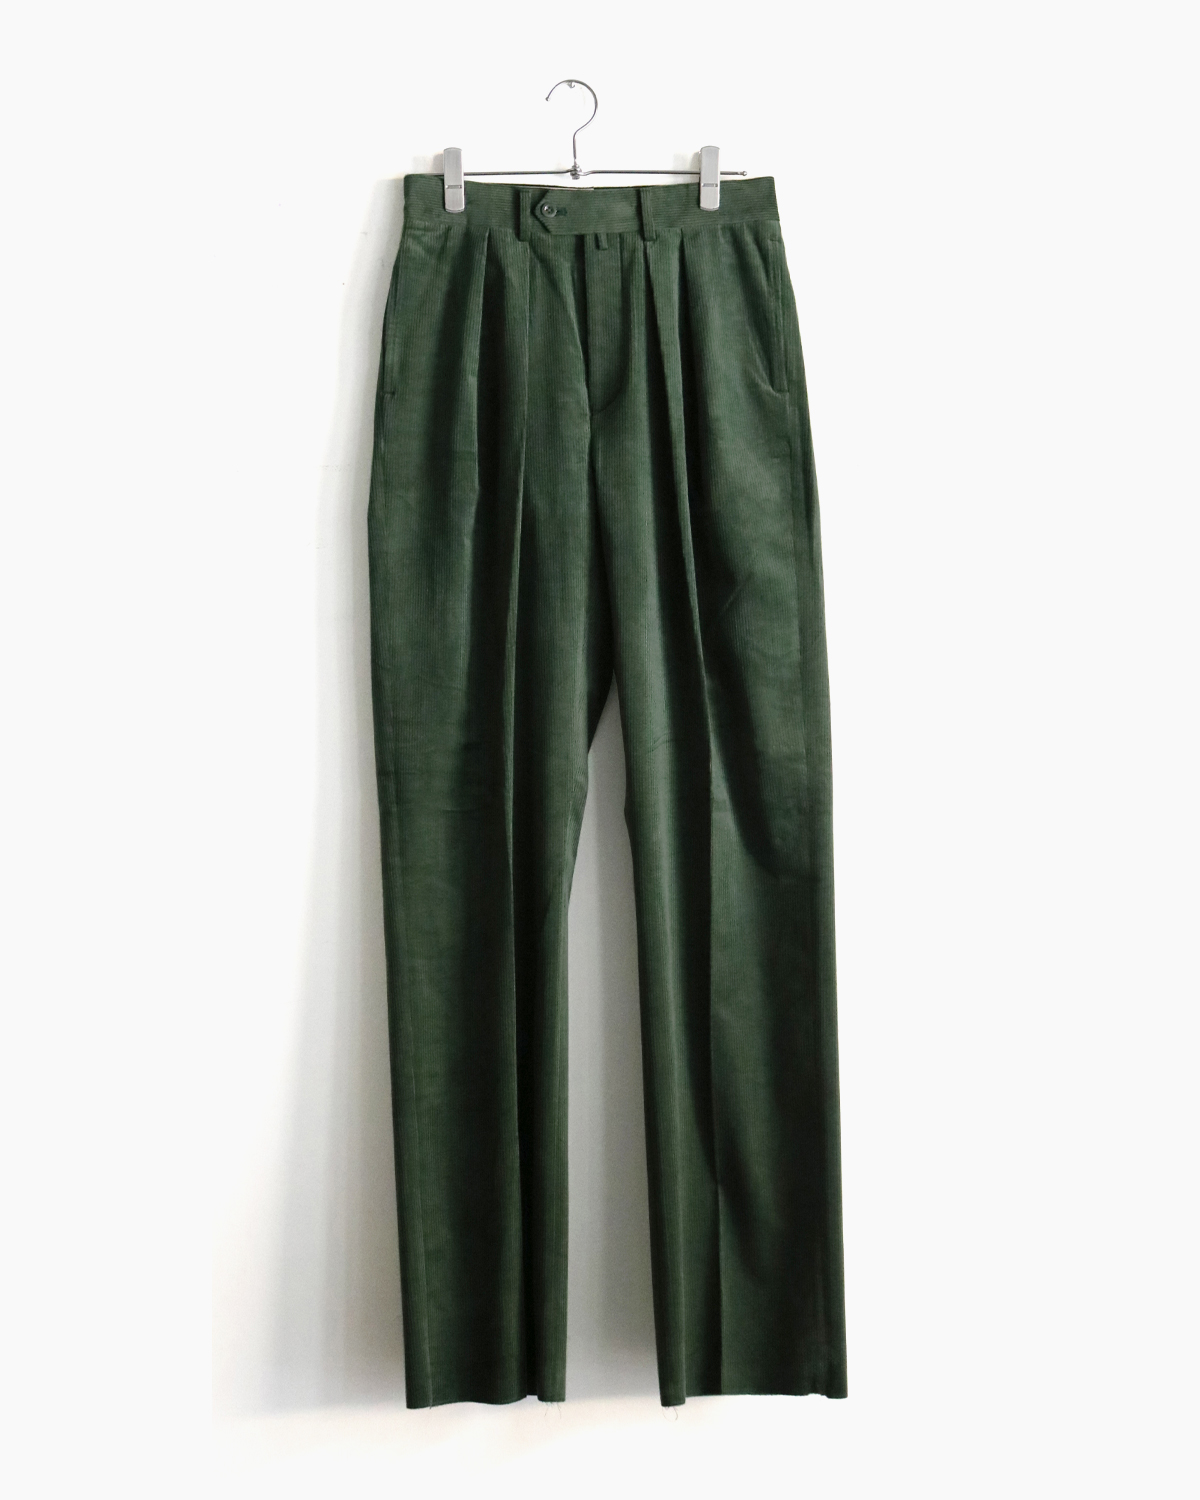 FRENCH CORDUROY｜WIDE - Green｜NEAT